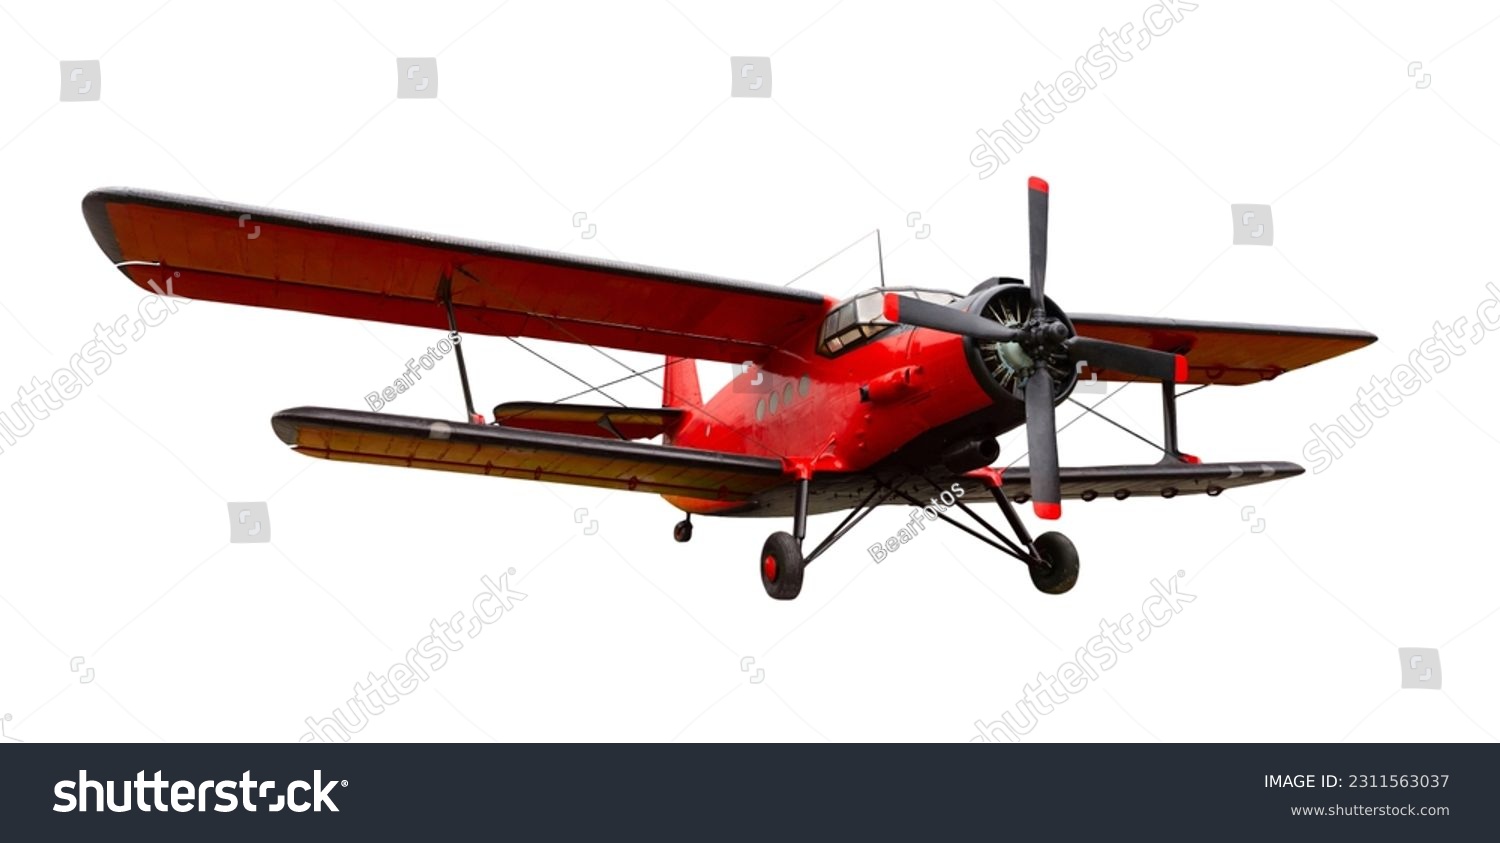 Red plane used for agricultural or sanitation purpose against clear white background #2311563037